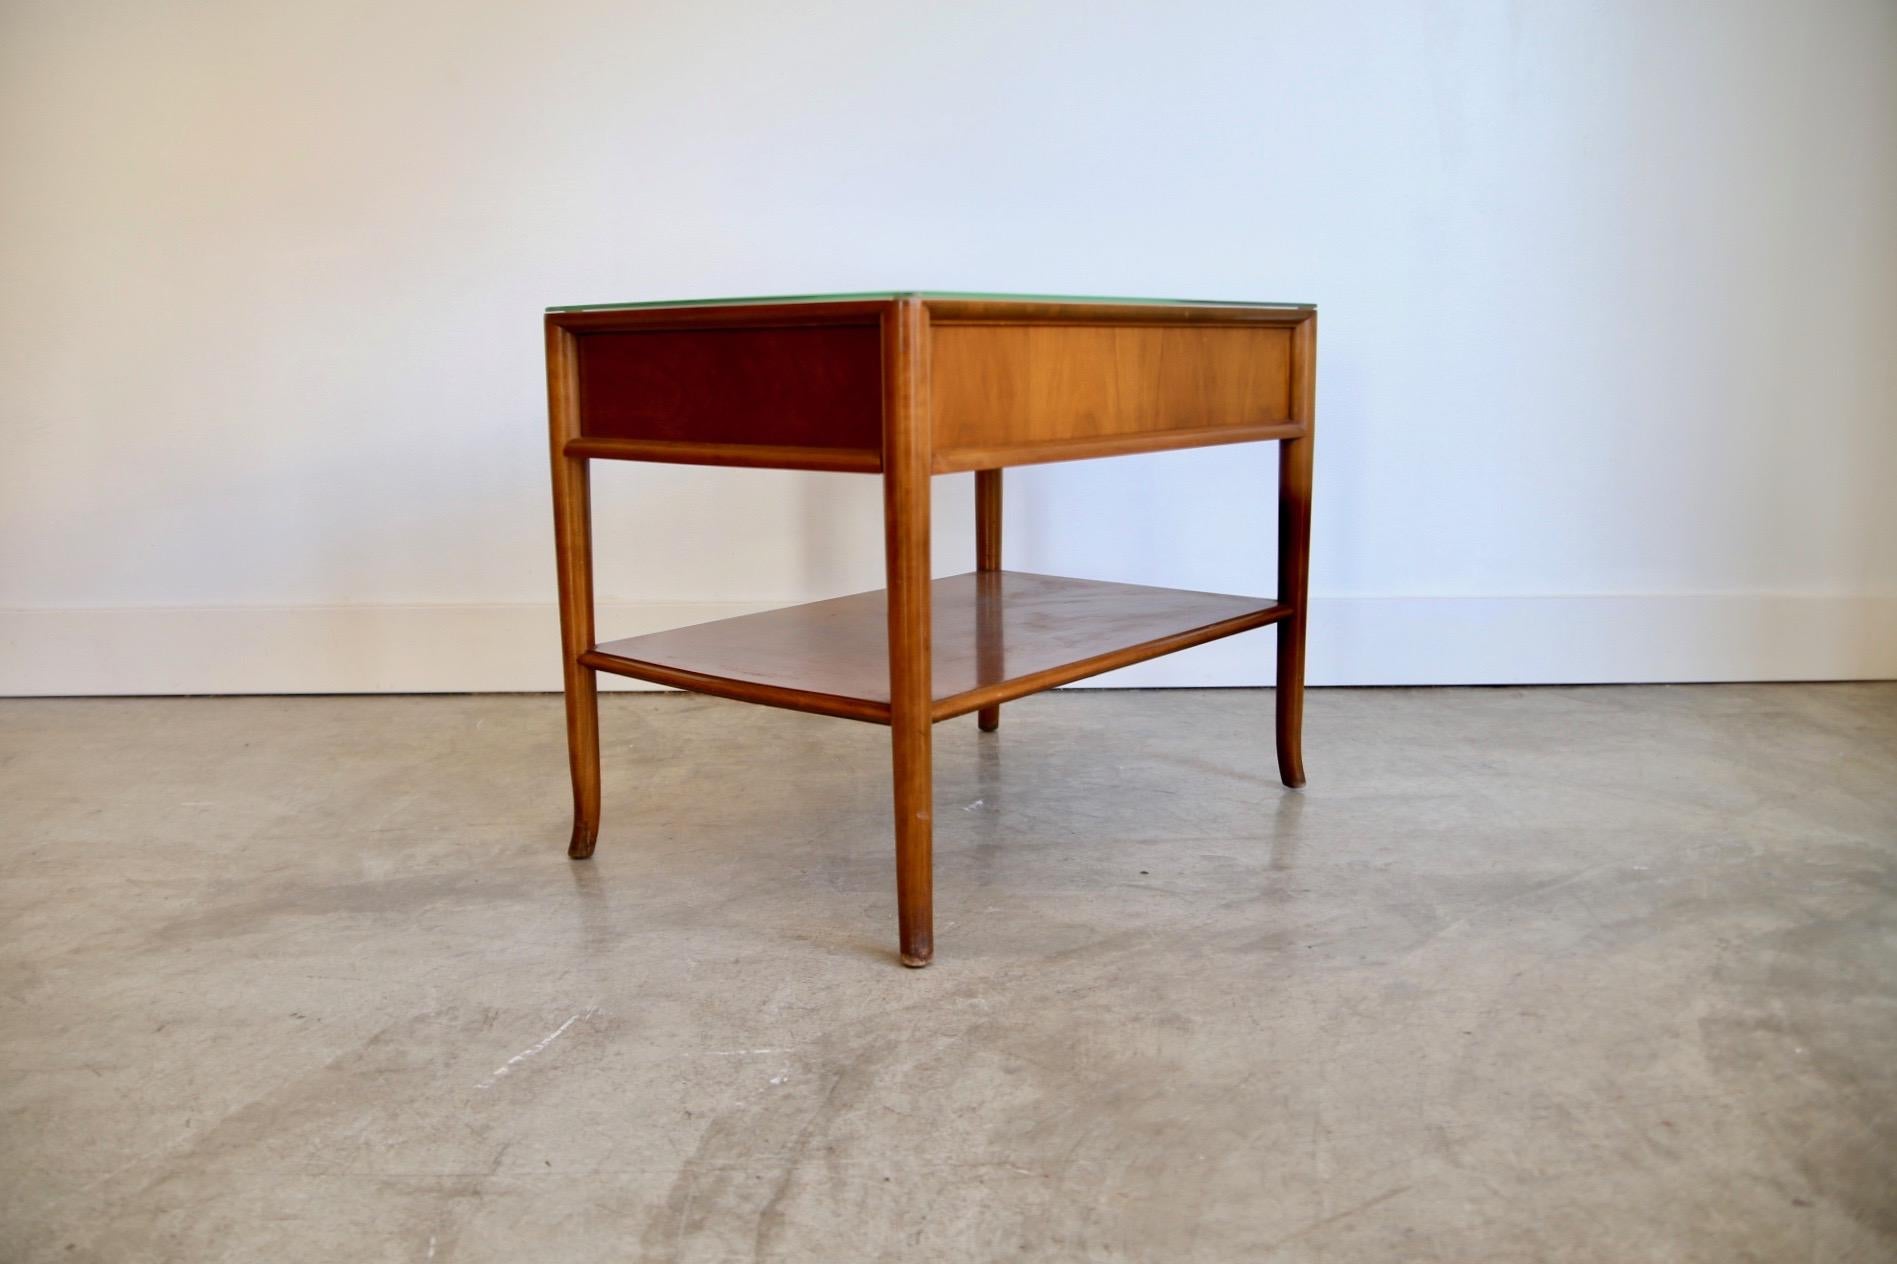 Designer: Robsjohn Gibbings 
Manufacture: Widdicomb 
Period/style: Mid-Century Modern 
Country: US 
Date: 1950s

*glass top optional.